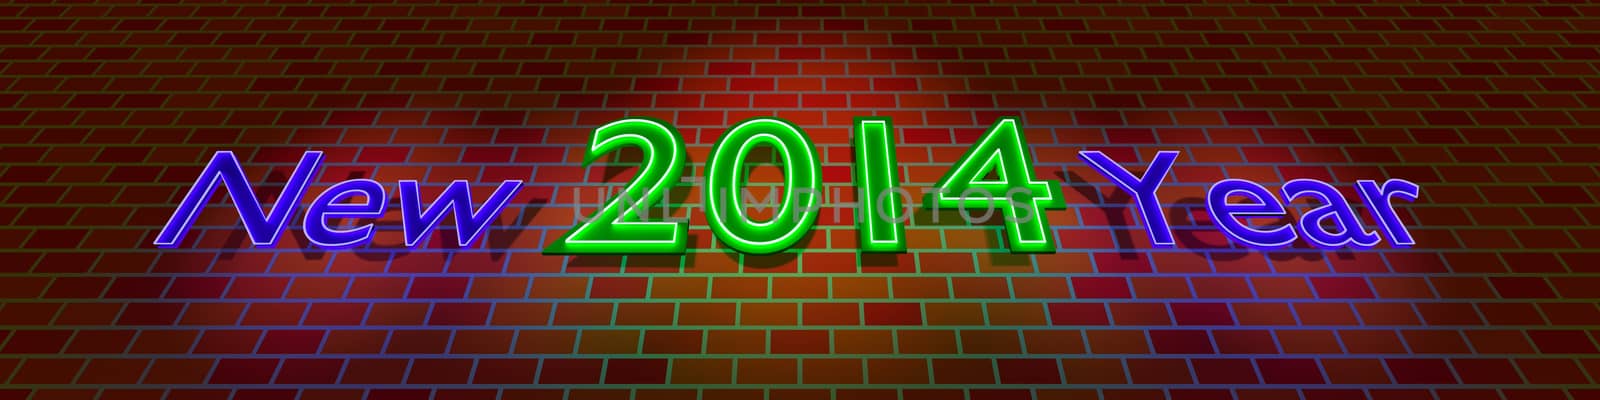 New Year 2014 - neon light on the brick wall.